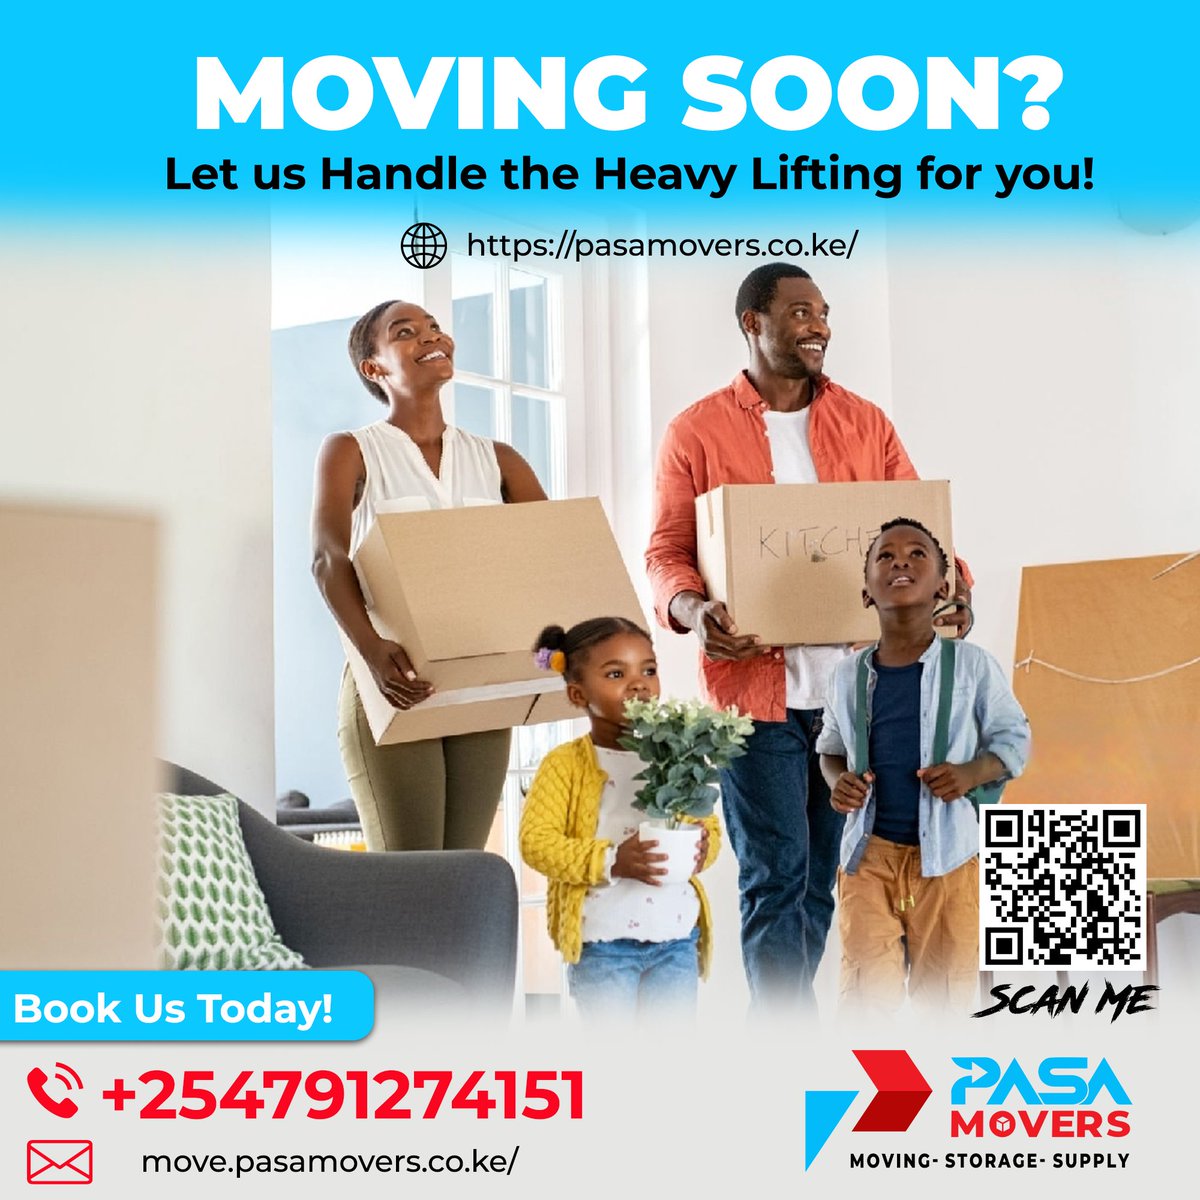 Moving shouldn't break the bank. Pasa Movers Ltd offers competitive rates for both residential and commercial moving services. Talk to us for a free quote and discover affordable solutions for your move! pasamovers.co.ke/request-a-quot… #AffordableMoving #PasaMovers #GetAQuote